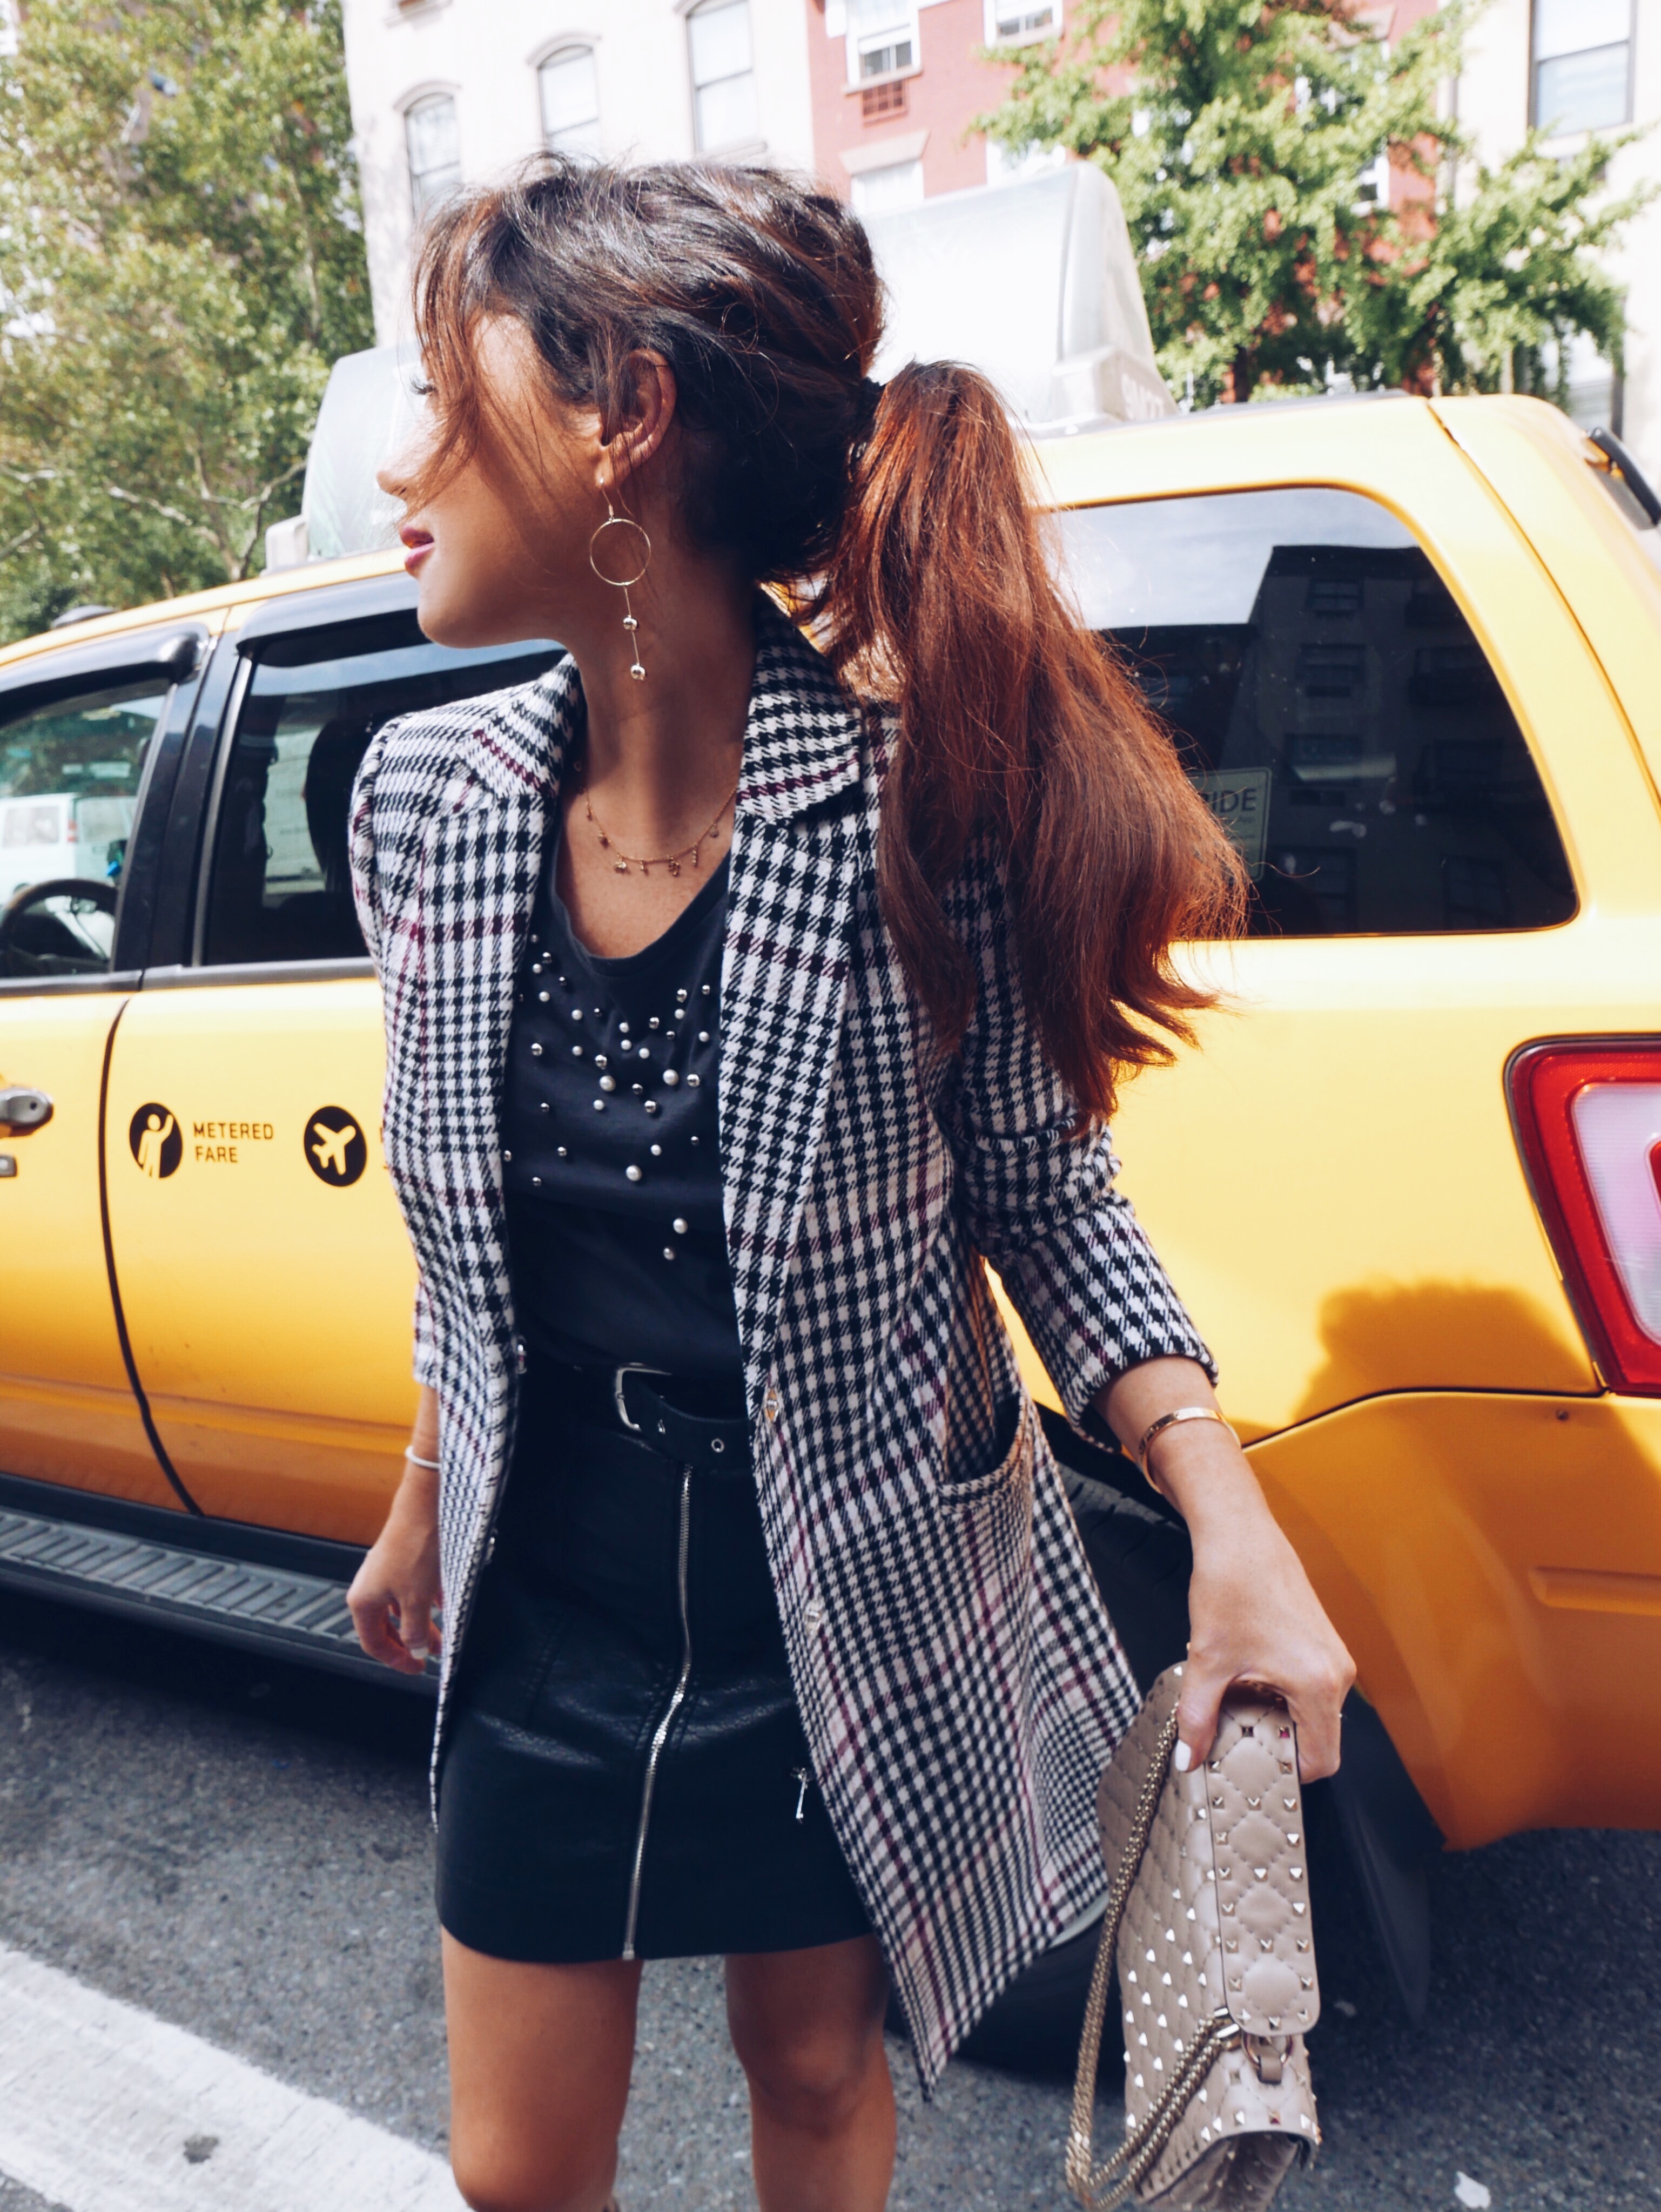 NEW YORK: grid-prints, check-mates and the picture that ended up in the ...